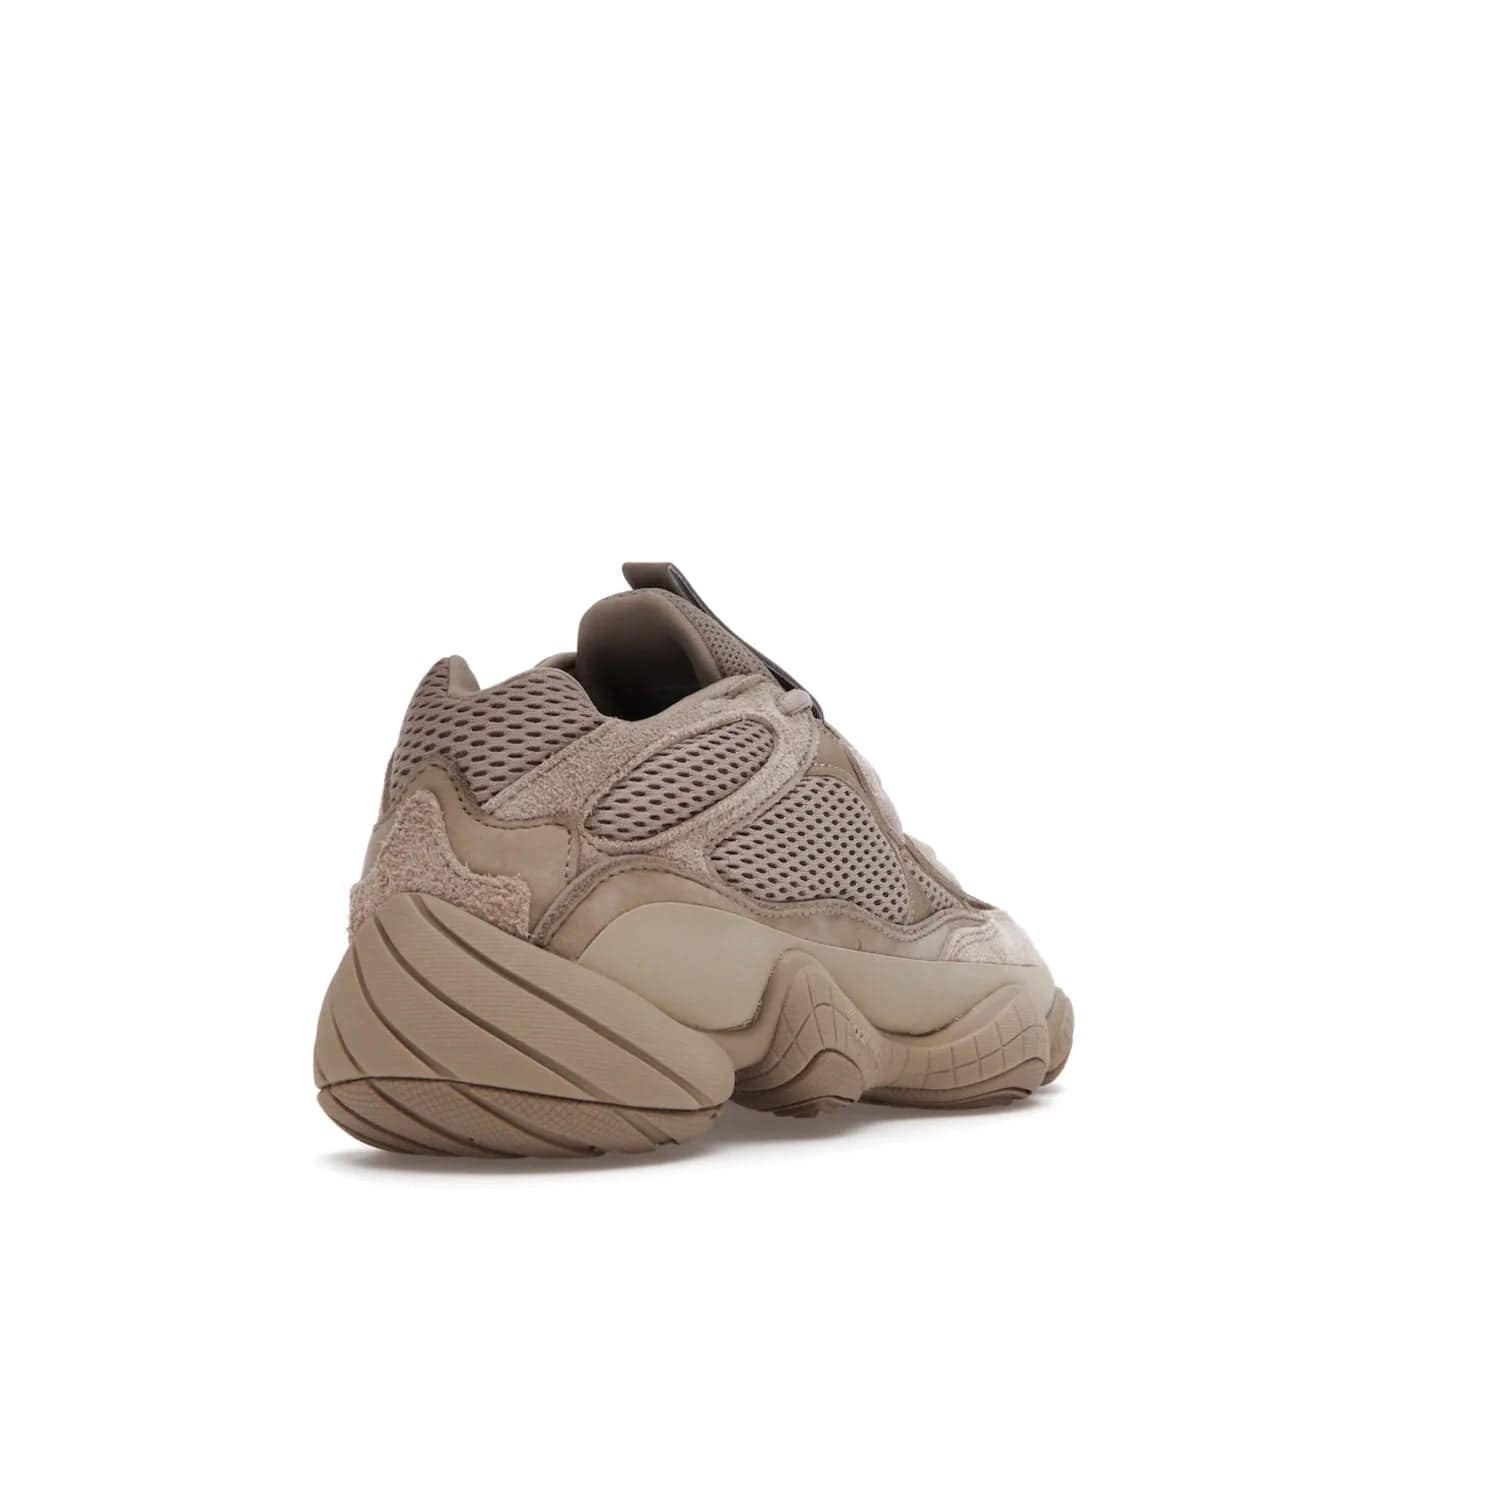 adidas Yeezy 500 Taupe Light - Image 31 - Only at www.BallersClubKickz.com - The adidas Yeezy 500 Taupe Light combines mesh, leather, and suede, with a durable adiPRENE sole for an eye-catching accessory. Reflective piping adds the perfect finishing touches to this unique silhouette. Ideal for any wardrobe, releasing in June 2021.